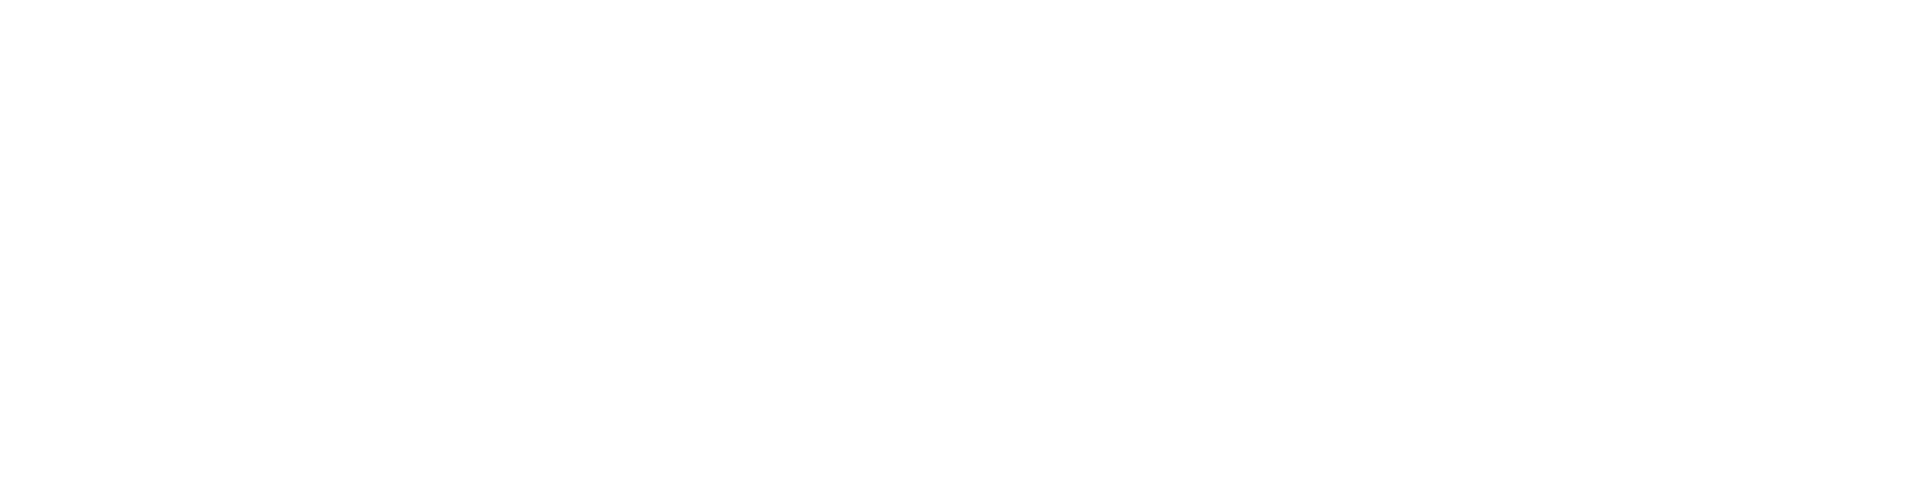 The Scuffed Series 12 - From the Edges